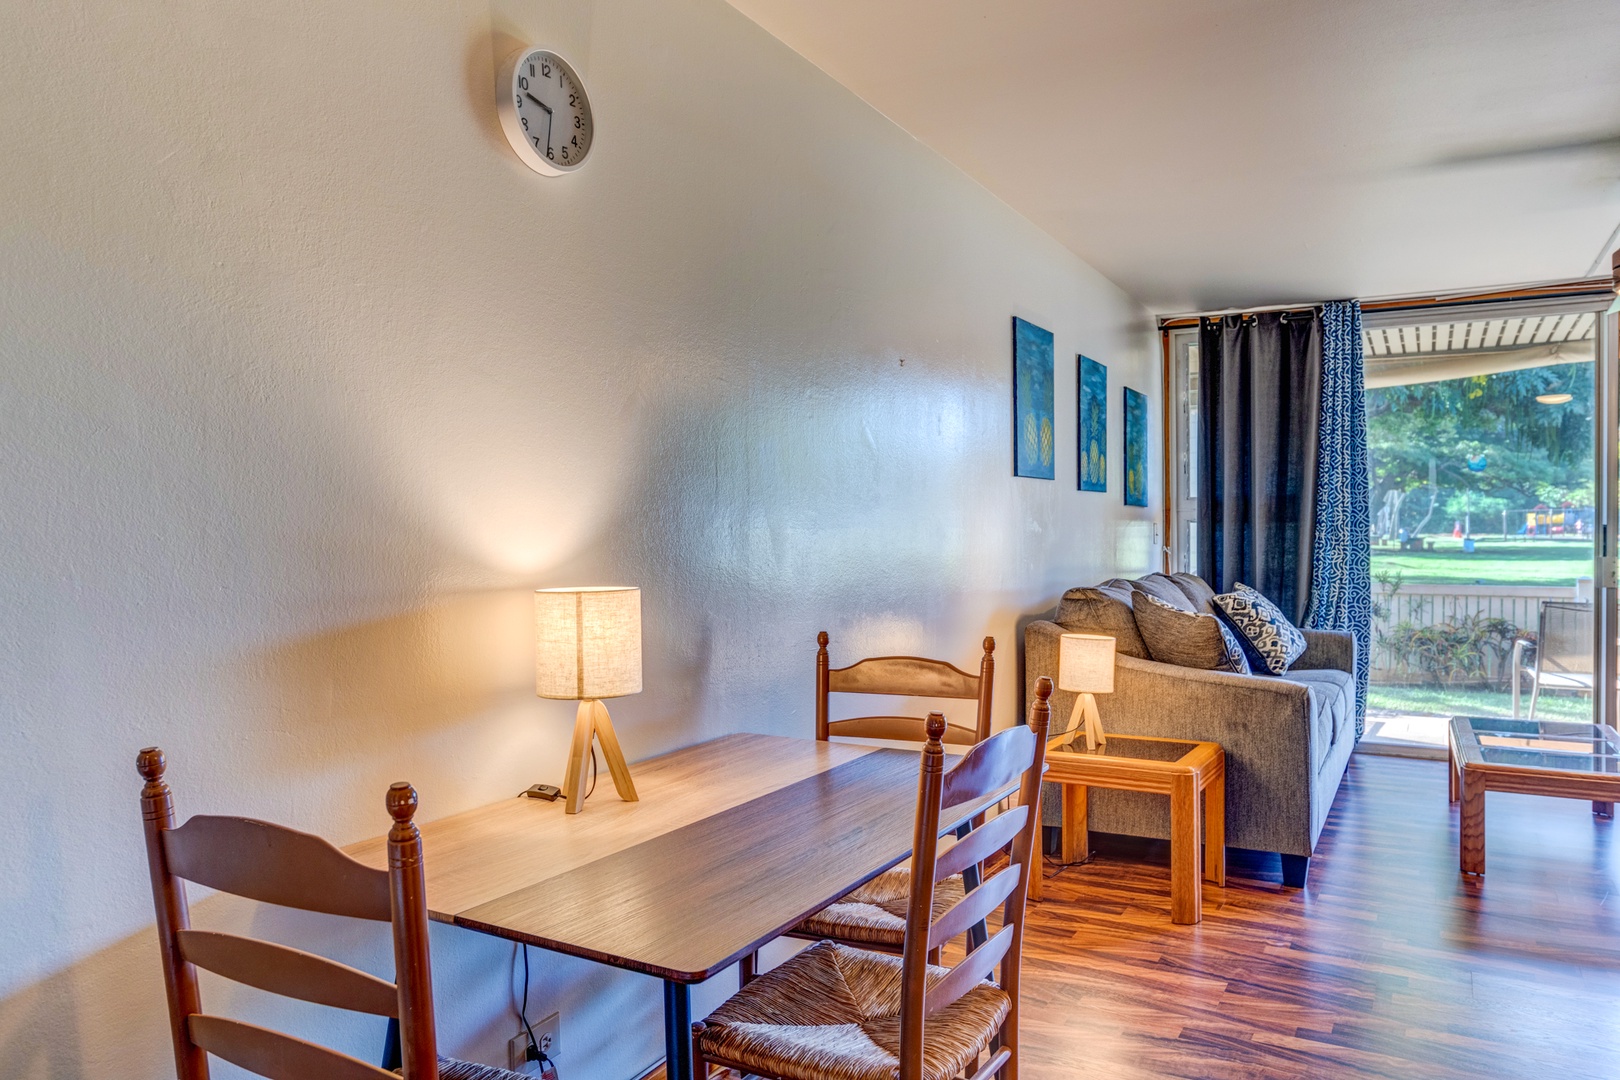 Lahaina Vacation Rentals, Hale Kai 109 - Inside table seating for 4